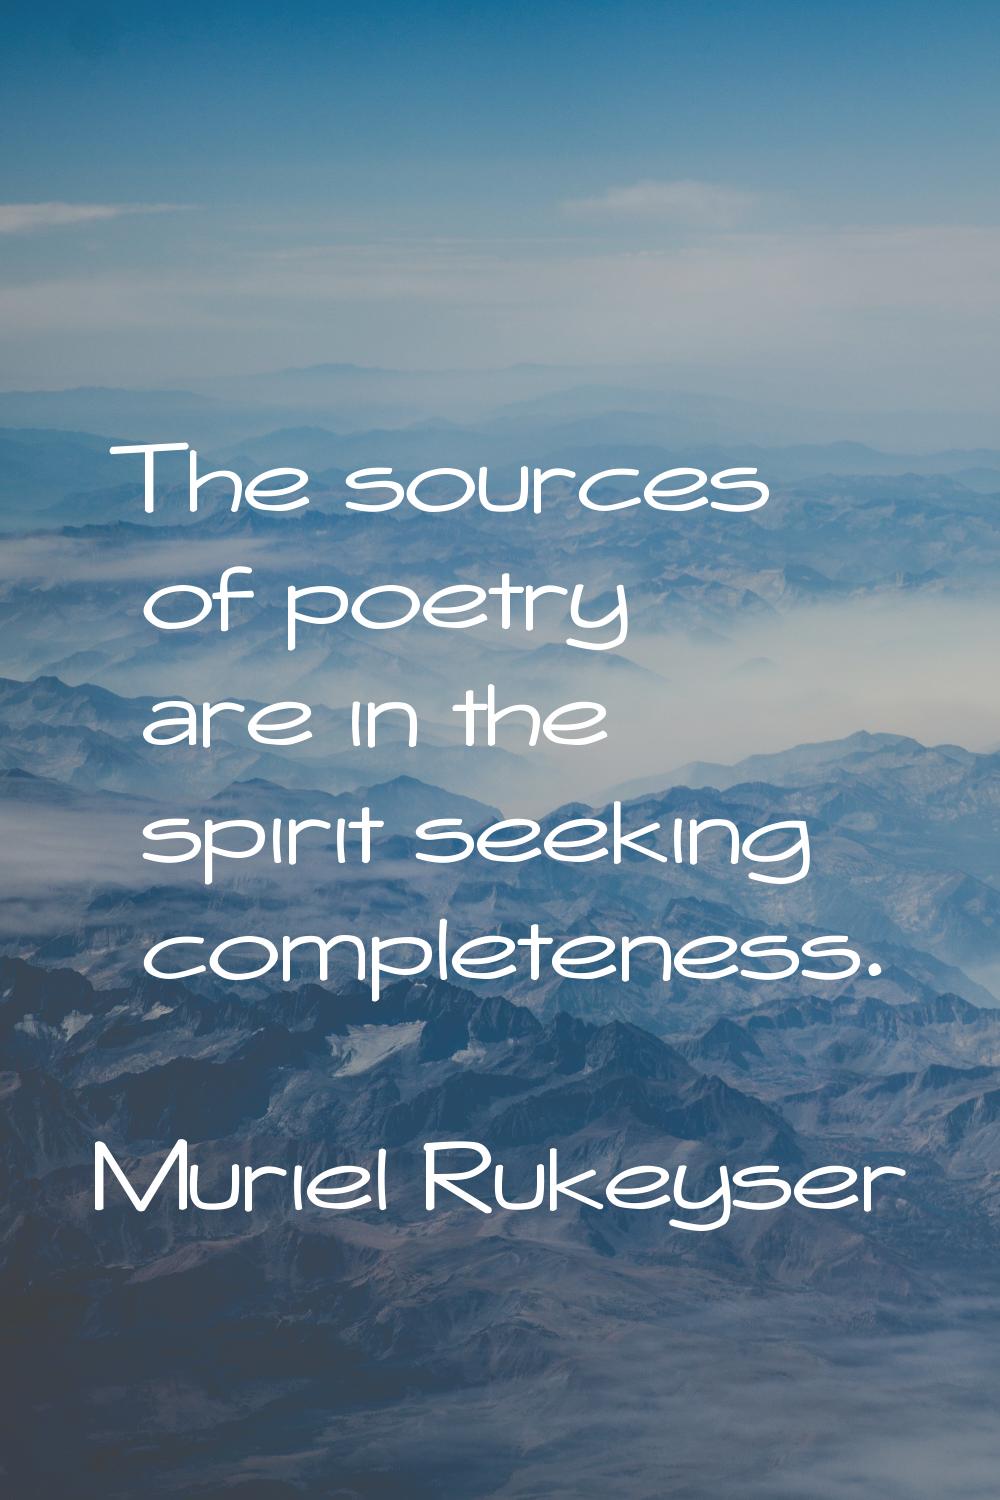 The sources of poetry are in the spirit seeking completeness.